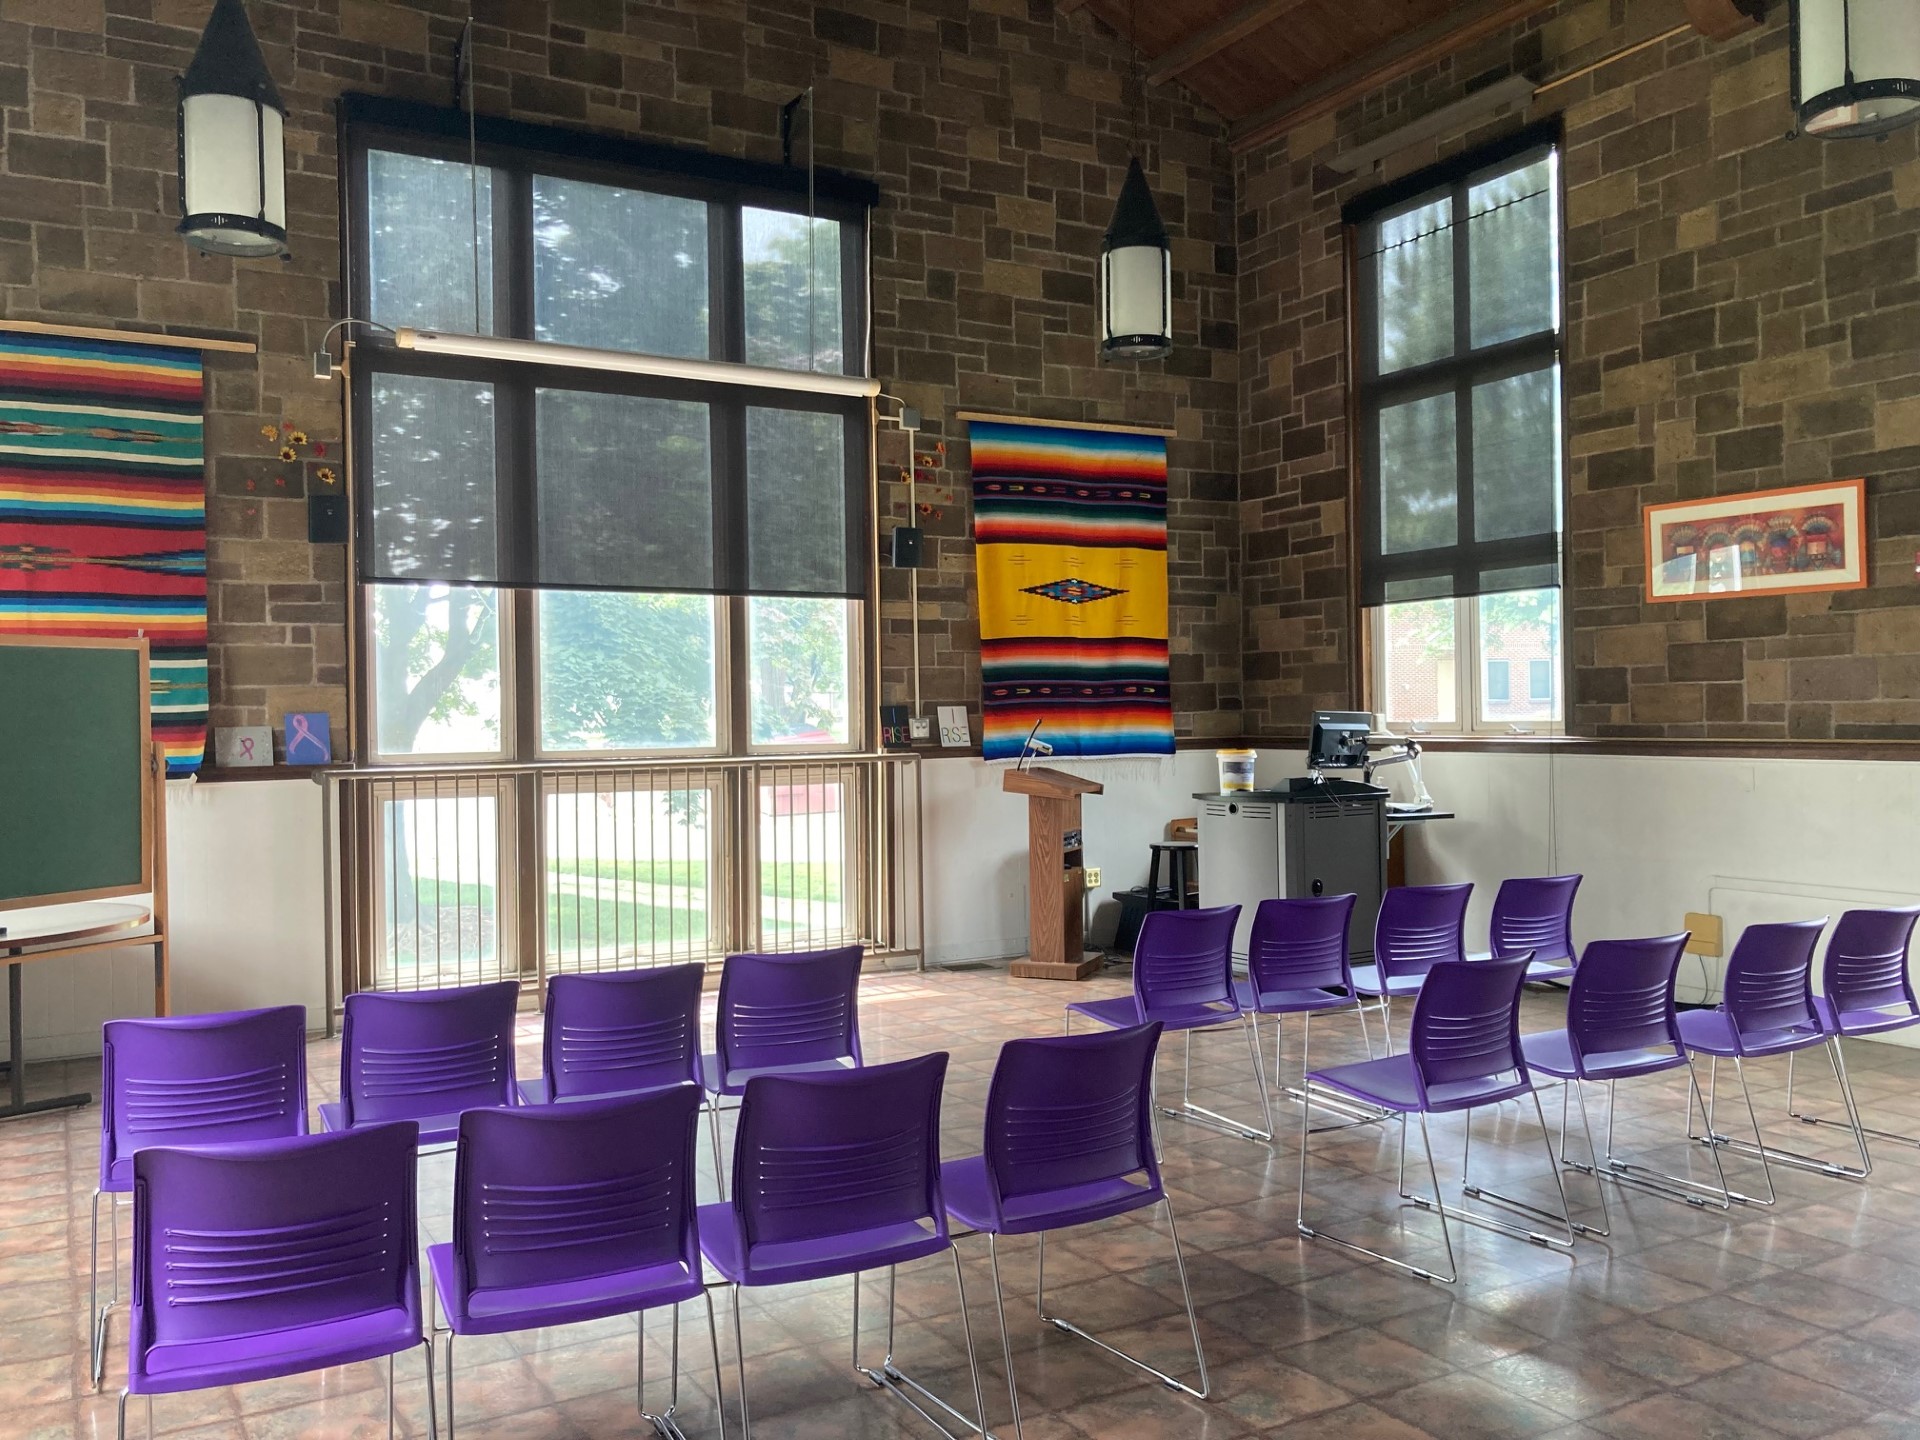 Two photos showing the interior of the Unity Room at the Multicultural Center. Both focus on a large conference table with chairs around it.